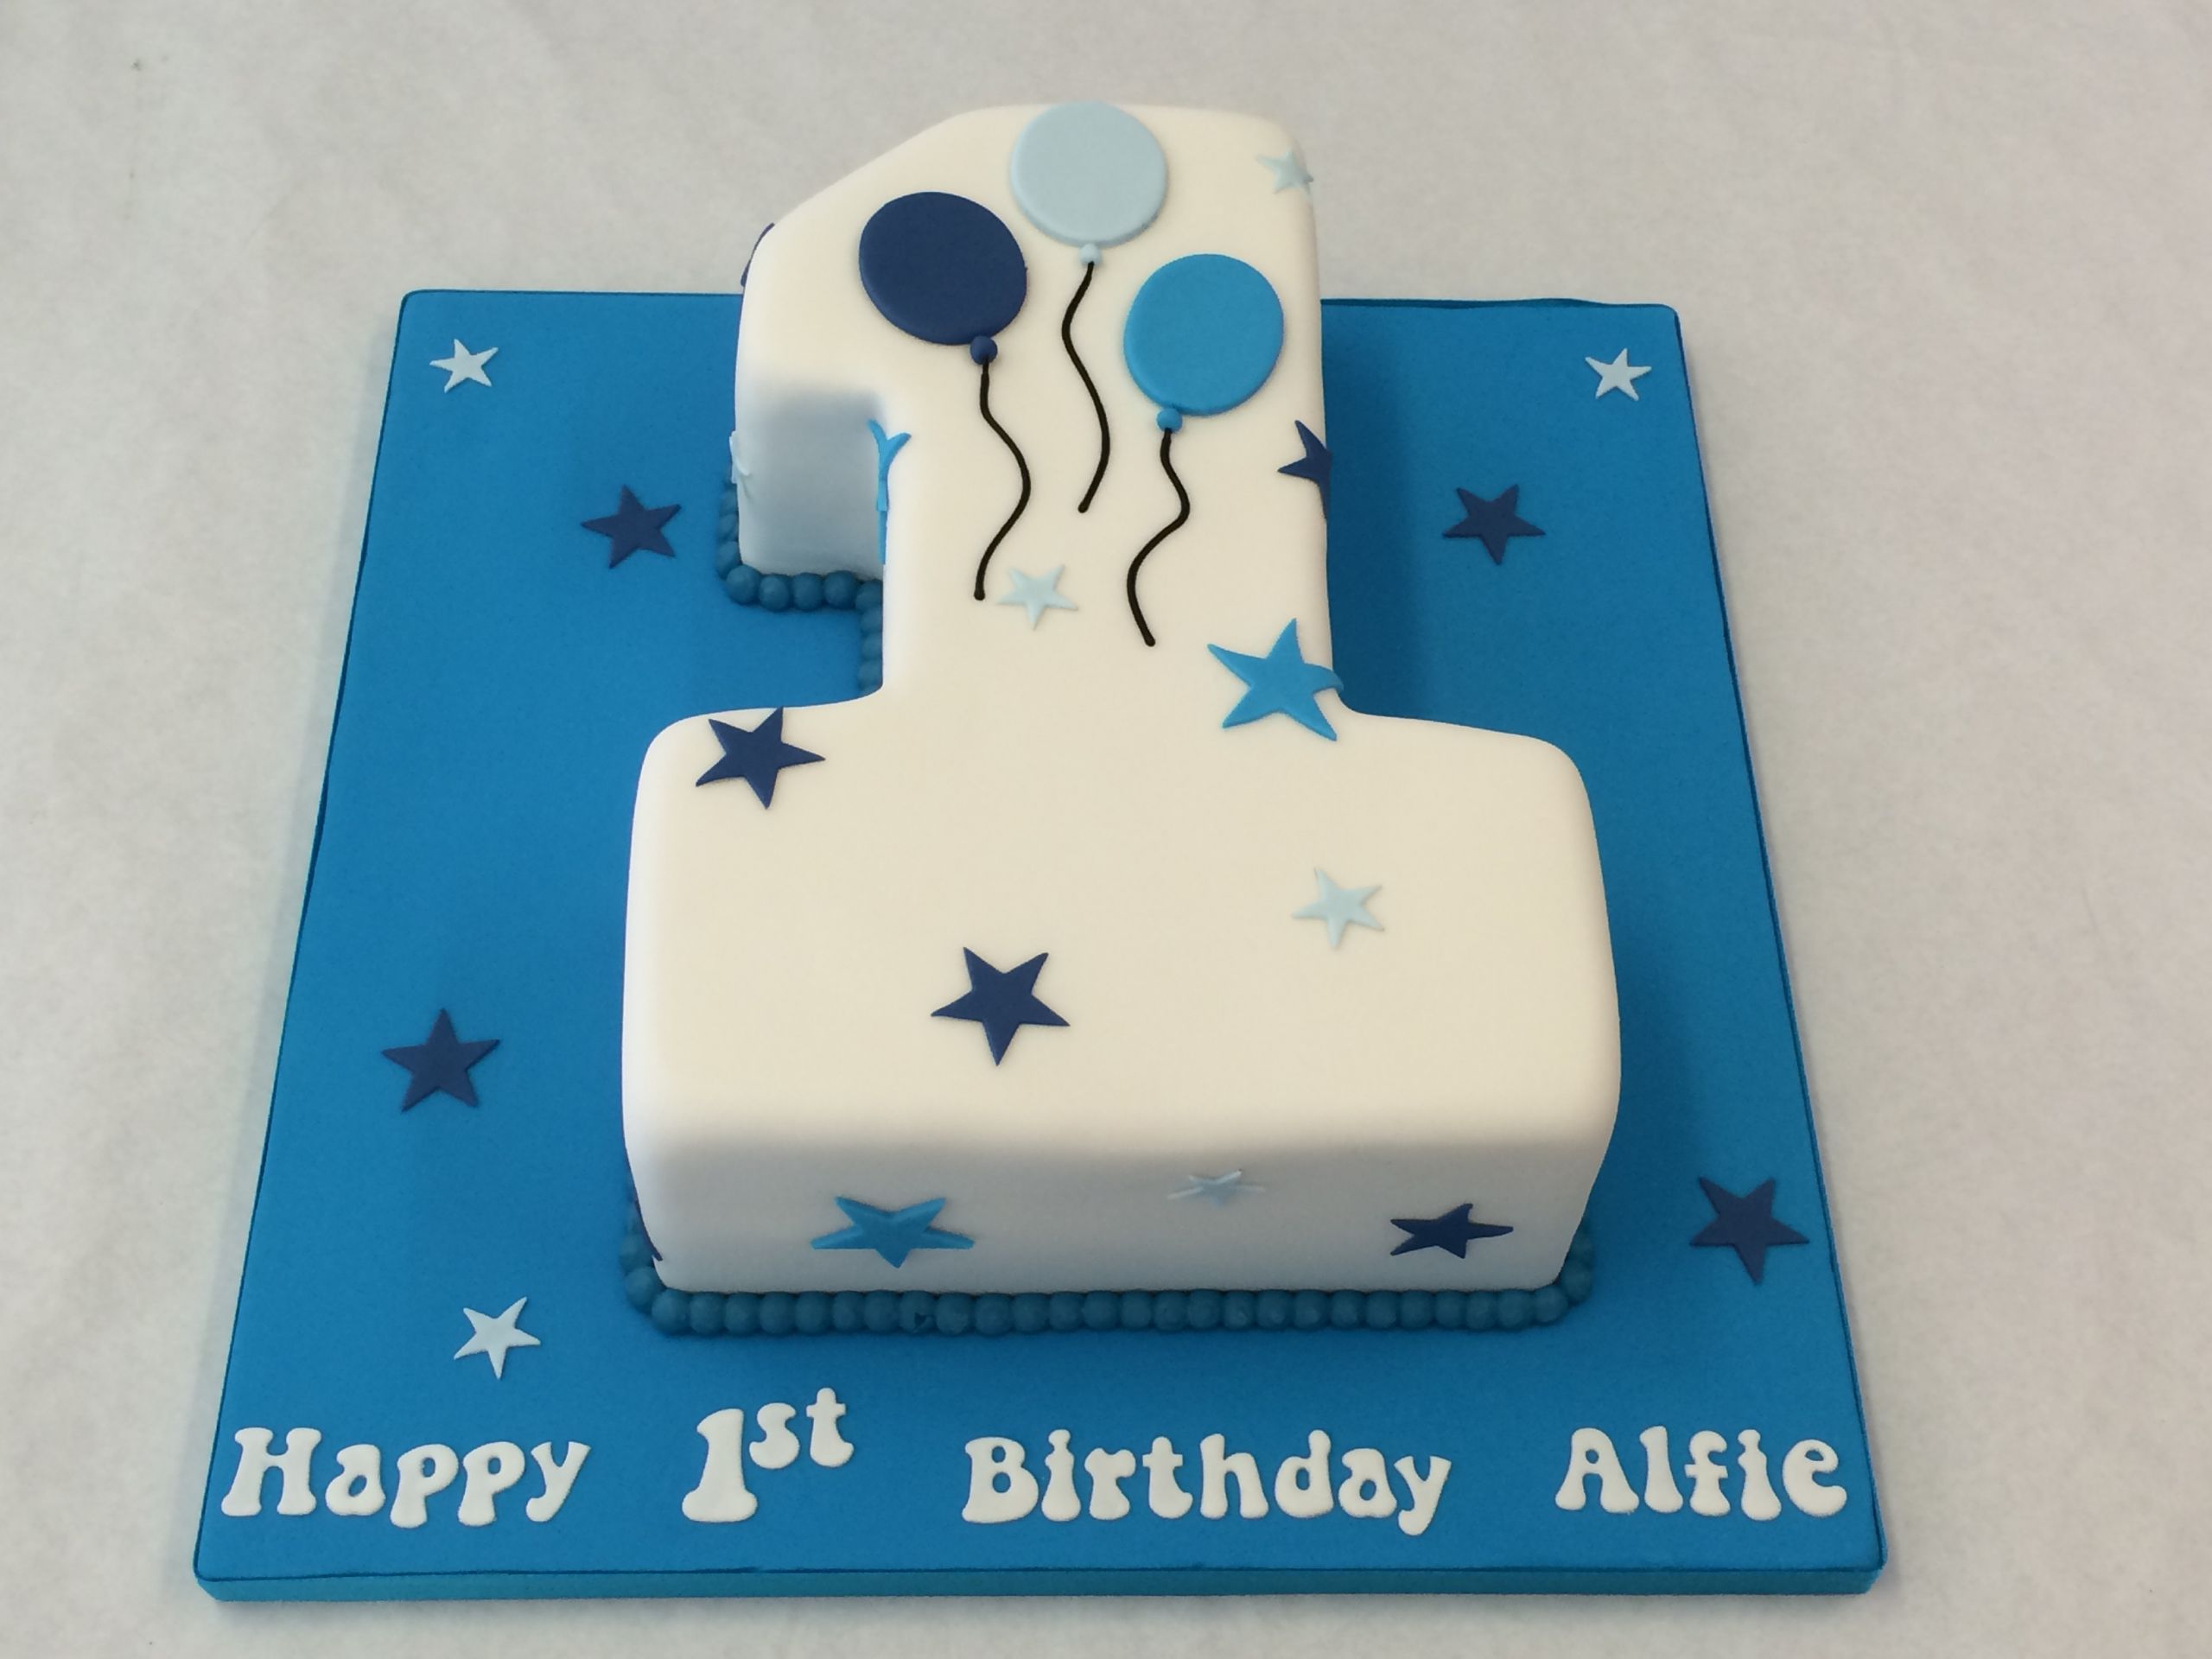 Number 1 Birthday Cake
 Small Number e Cake with Balloons Children s Birthday